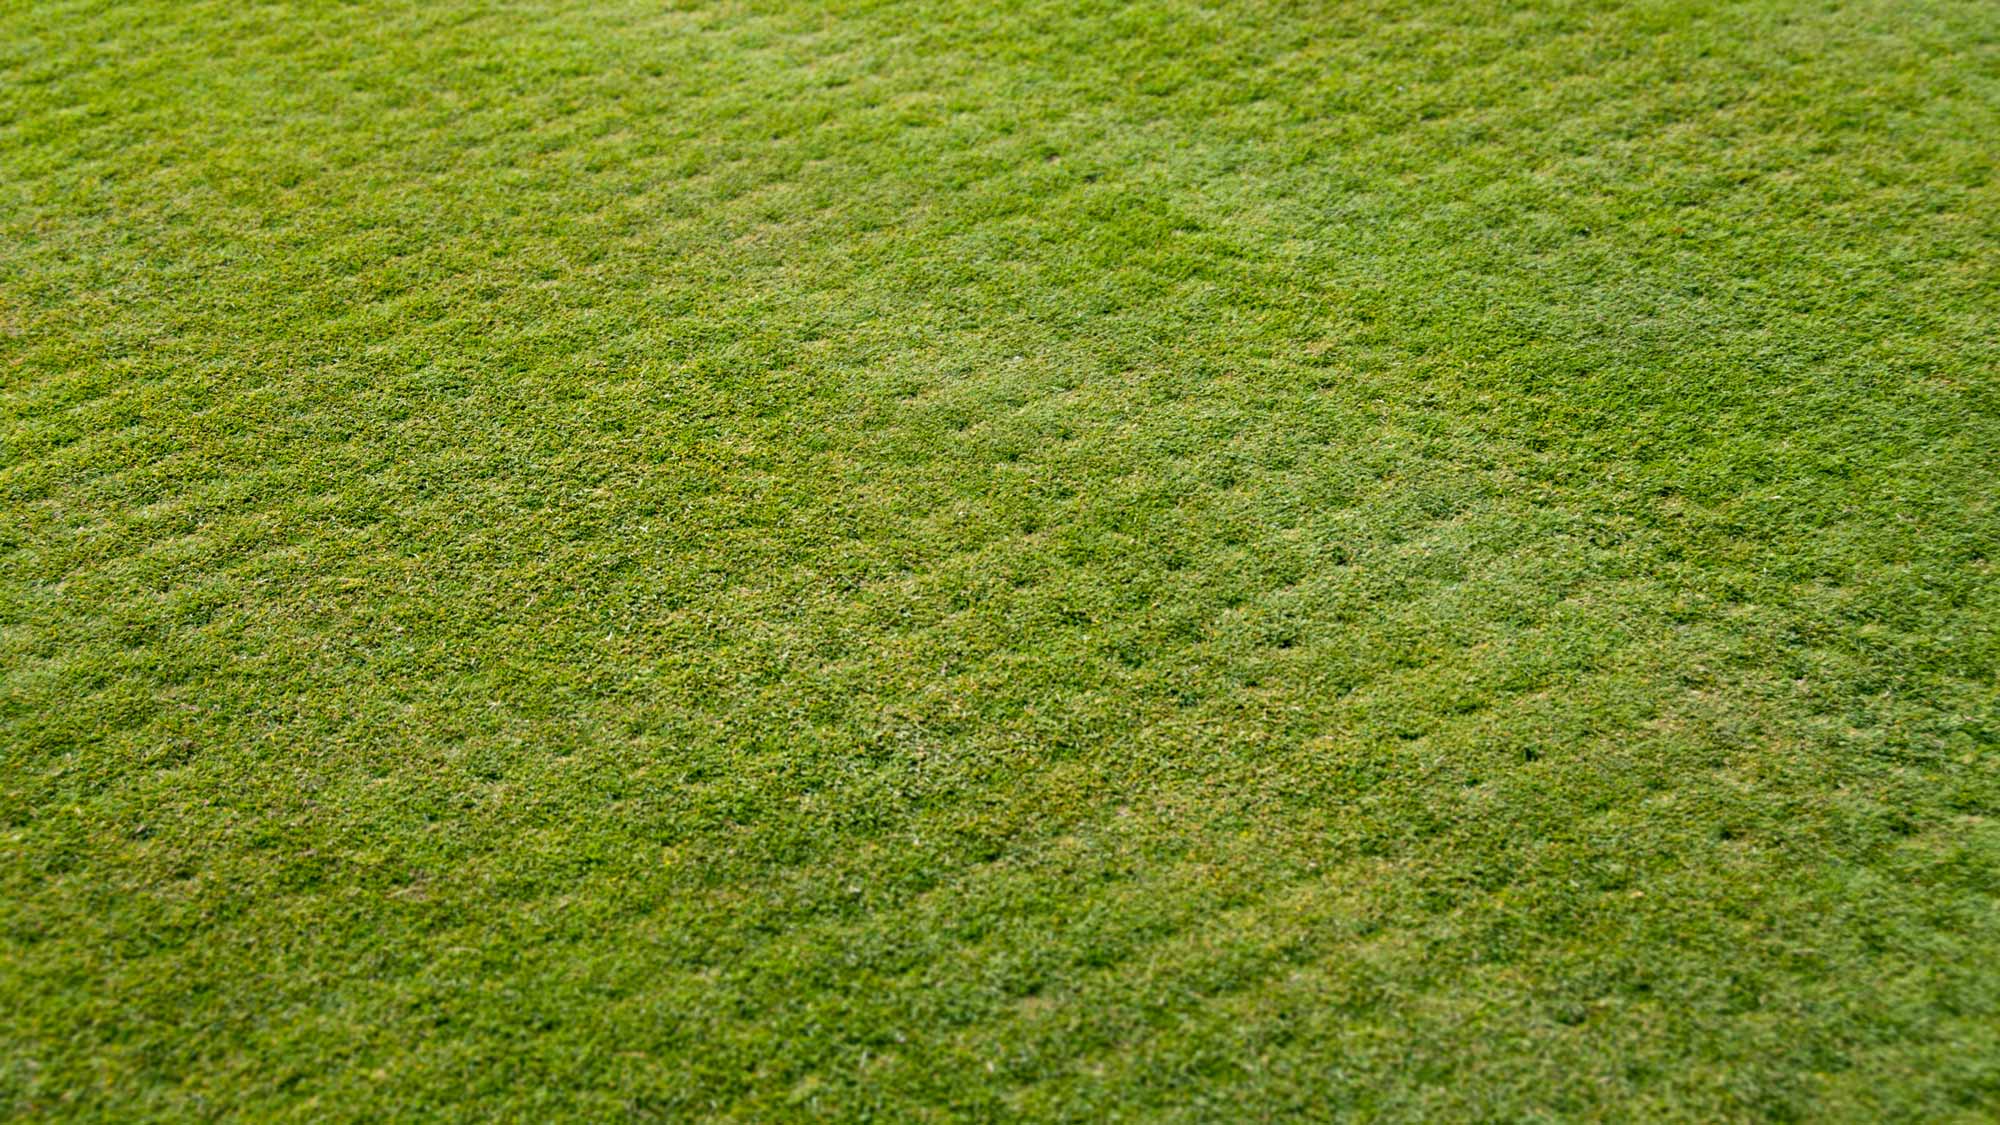 Should you aerate your own lawn? A golf superintendent explains.